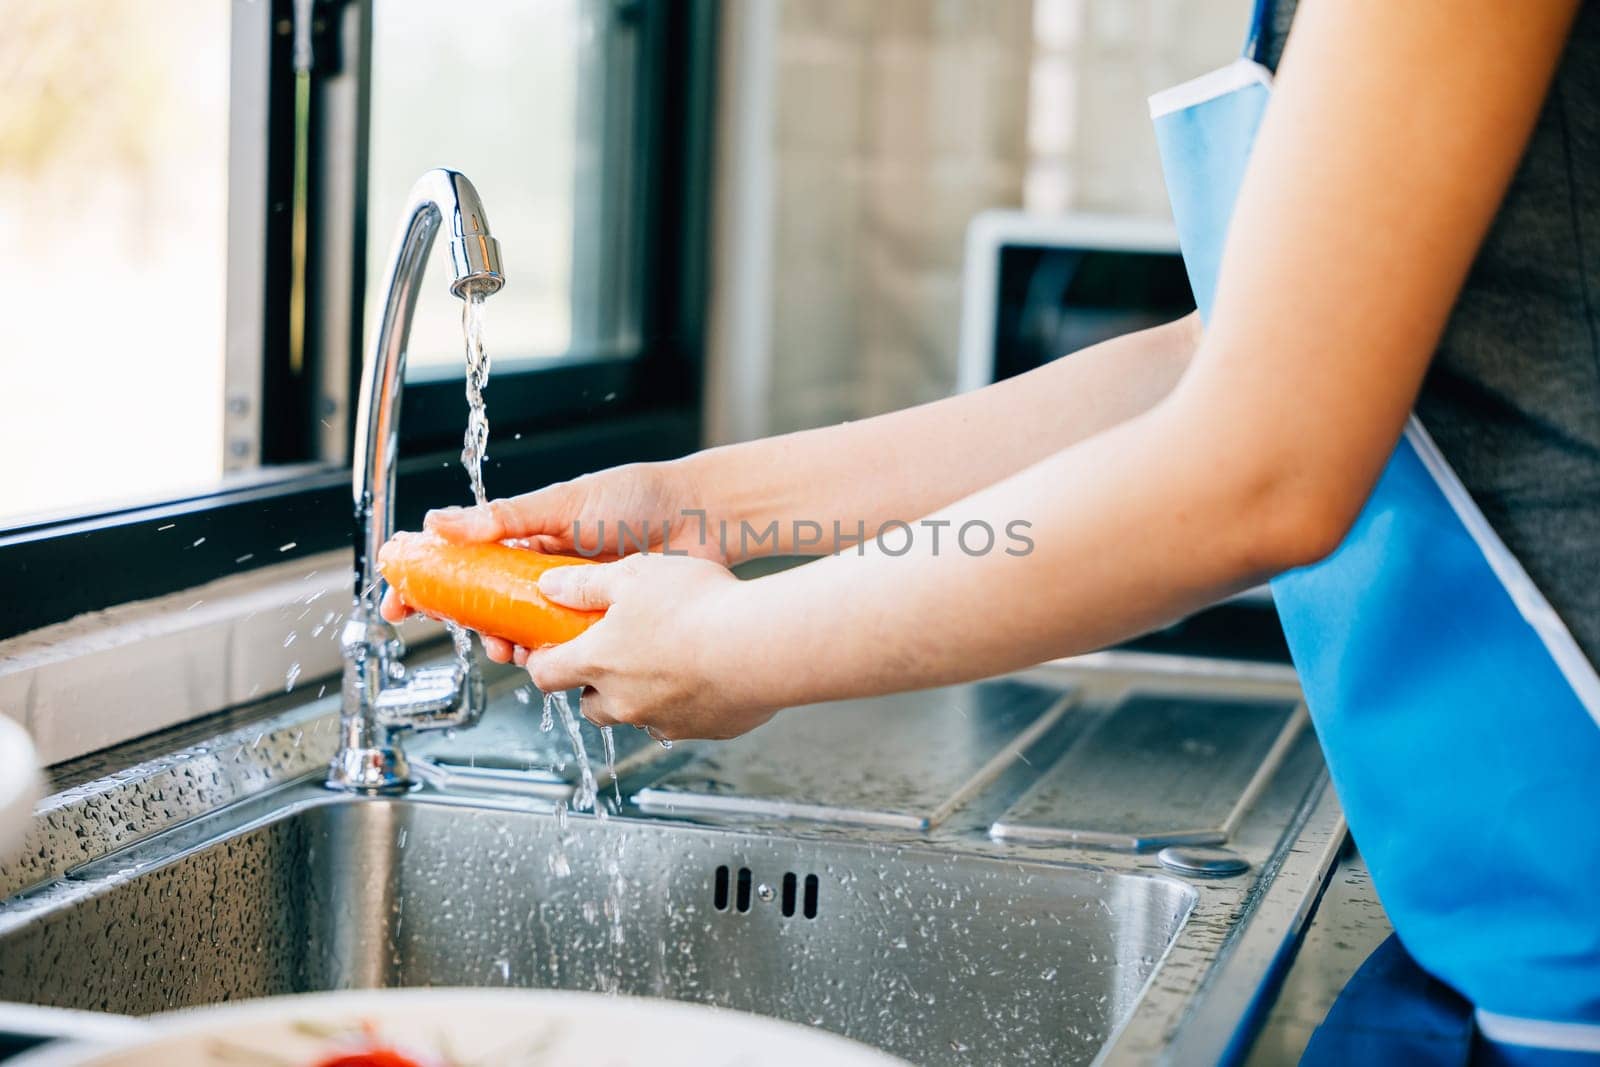 A young woman cleans and washes carrots in the kitchen by Sorapop